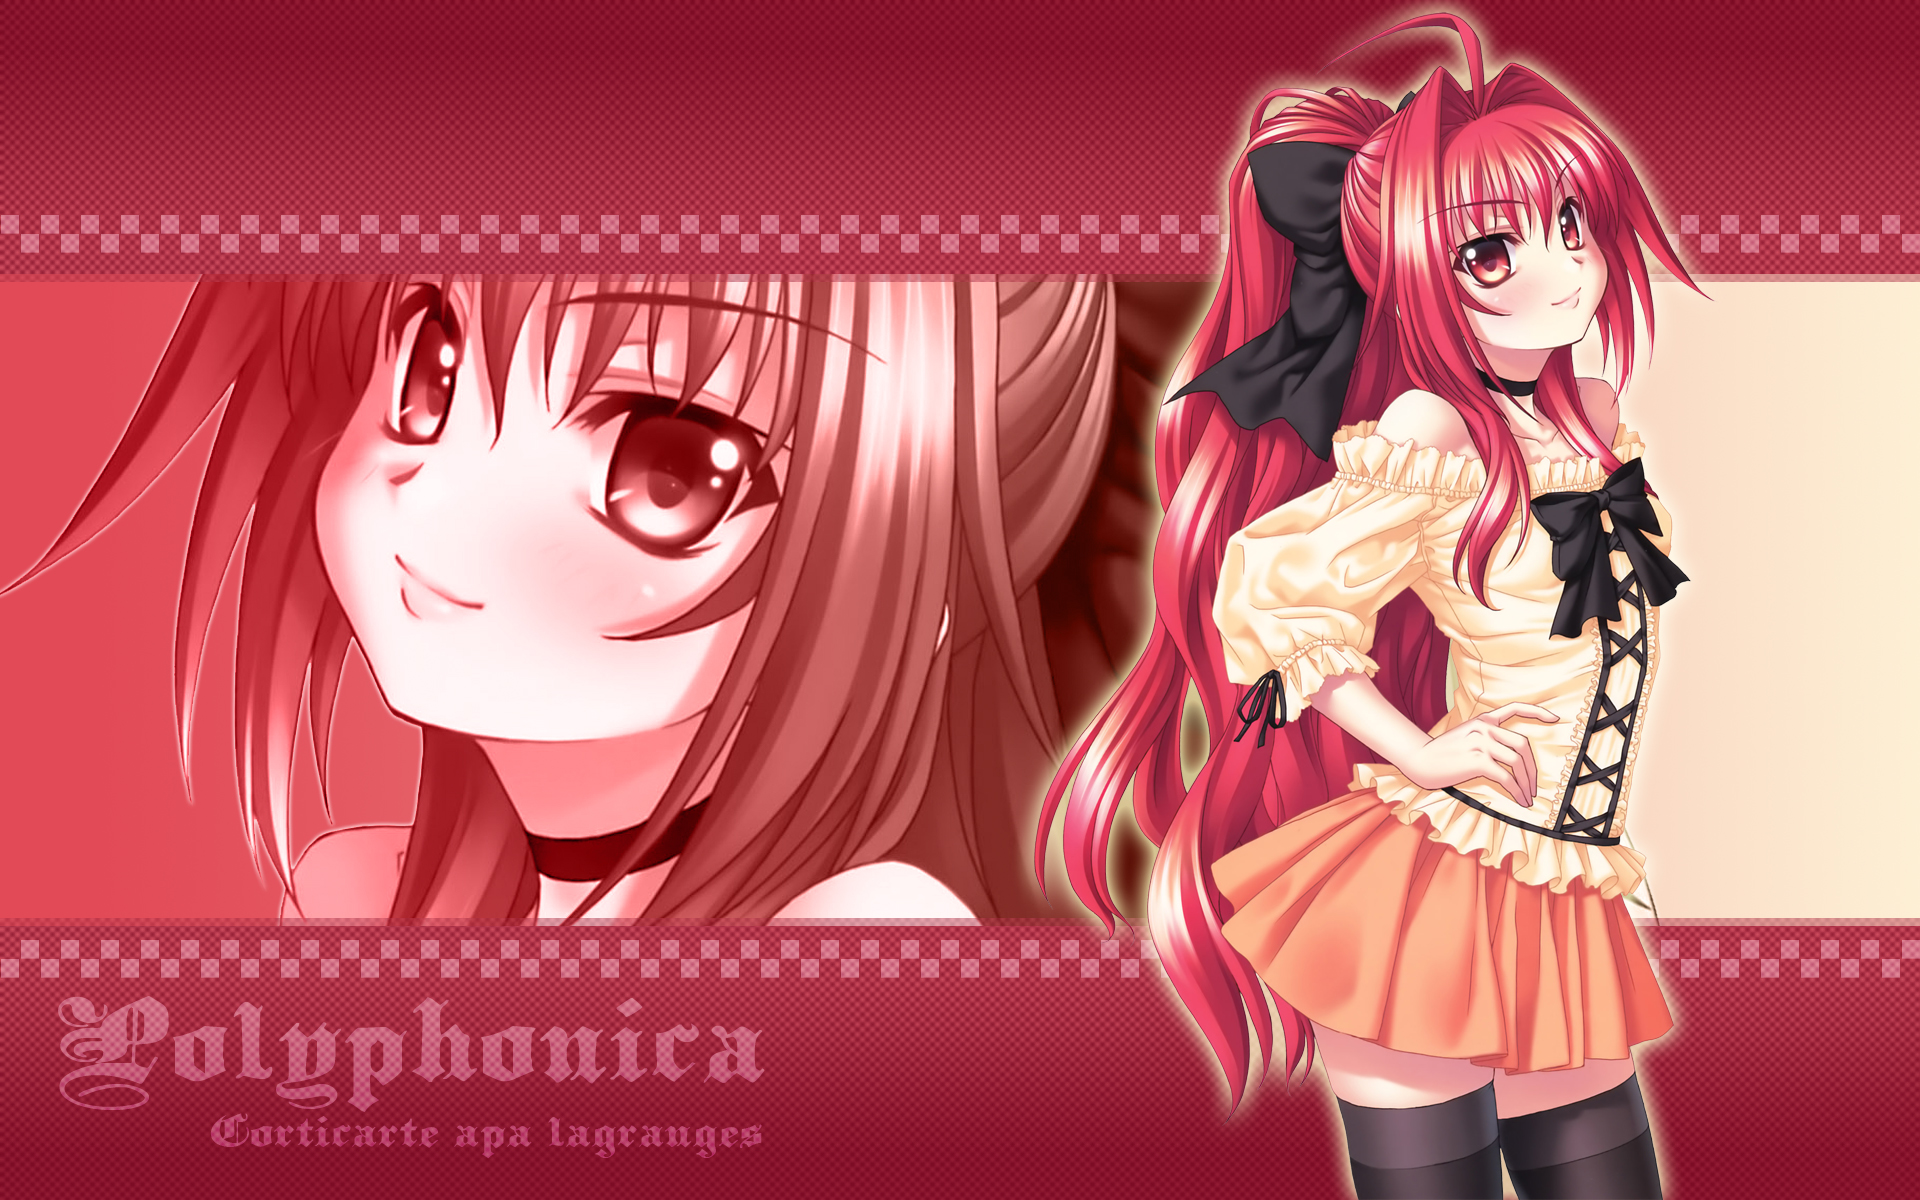 Anime Polyphonica HD Wallpaper | Background Image